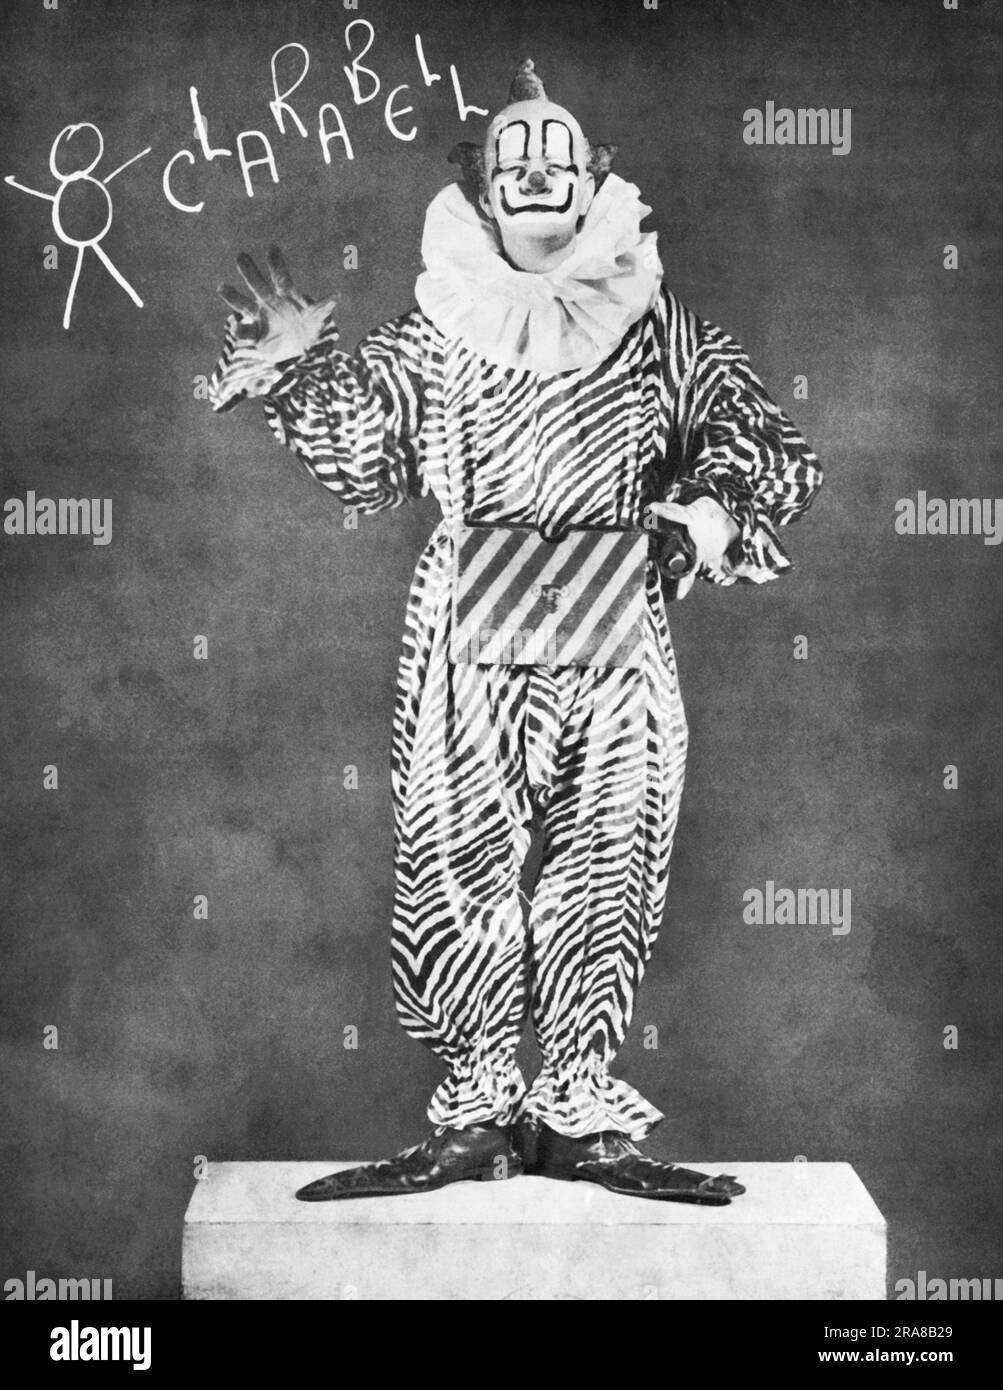 New York, New York:  c. 1952 A portrait of Clarabell the Clown, the mute patner of Howdy Doody of the popular children's NBC television show, 'The Howdy Doody Show'. Stock Photo